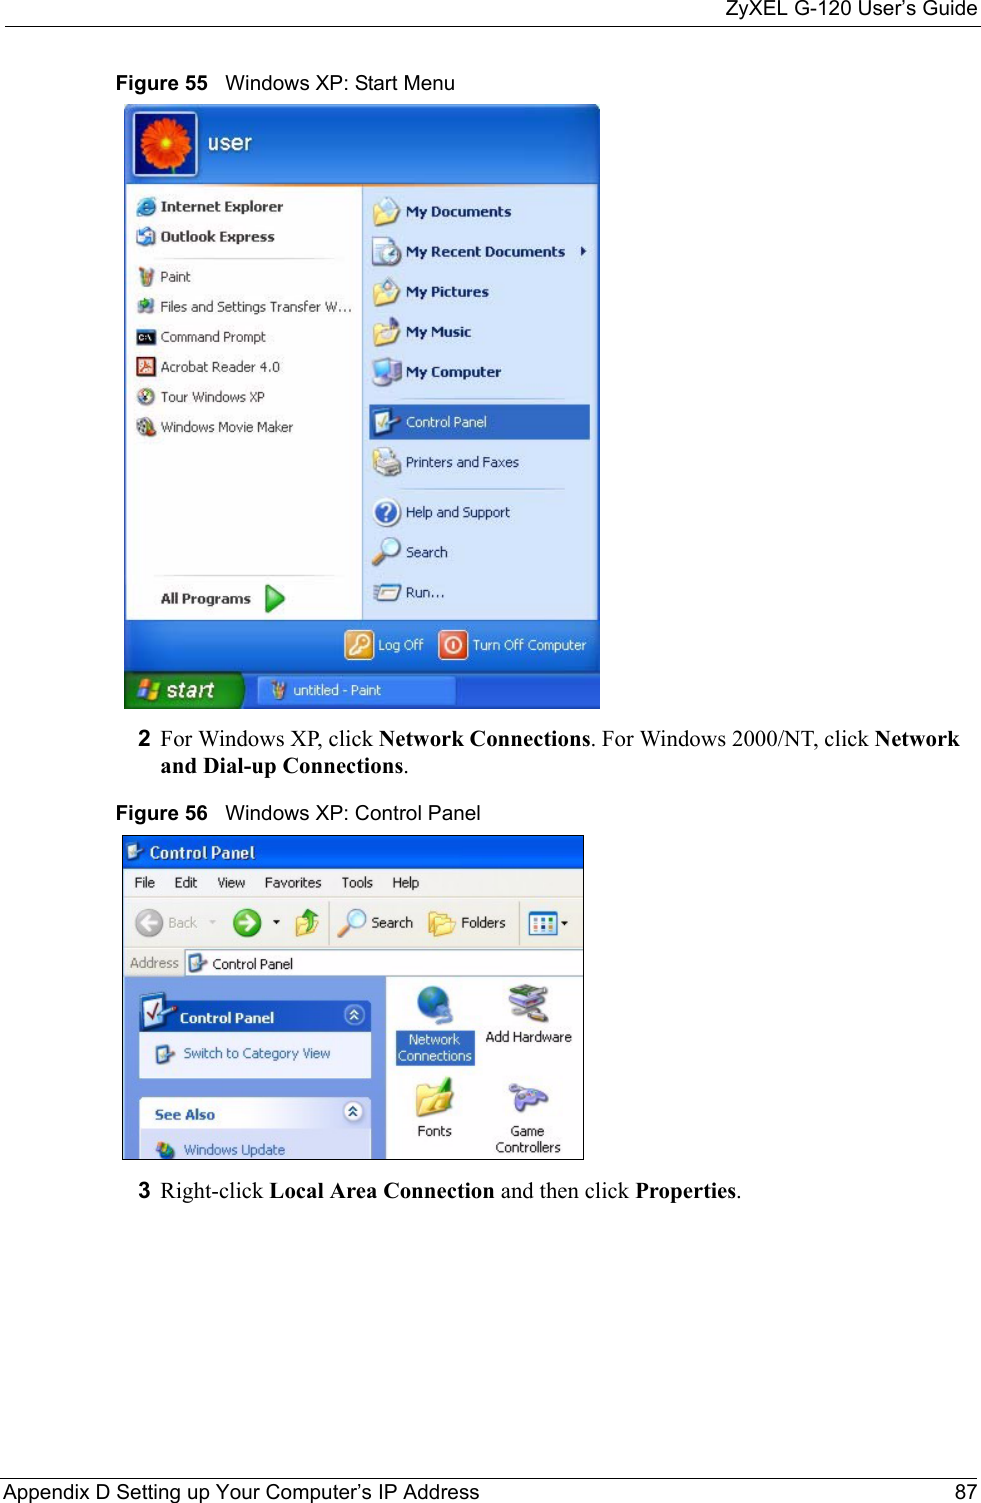 ZyXEL G-120 User’s GuideAppendix D Setting up Your Computer’s IP Address 87Figure 55   Windows XP: Start Menu2For Windows XP, click Network Connections. For Windows 2000/NT, click Network and Dial-up Connections.Figure 56   Windows XP: Control Panel3Right-click Local Area Connection and then click Properties.